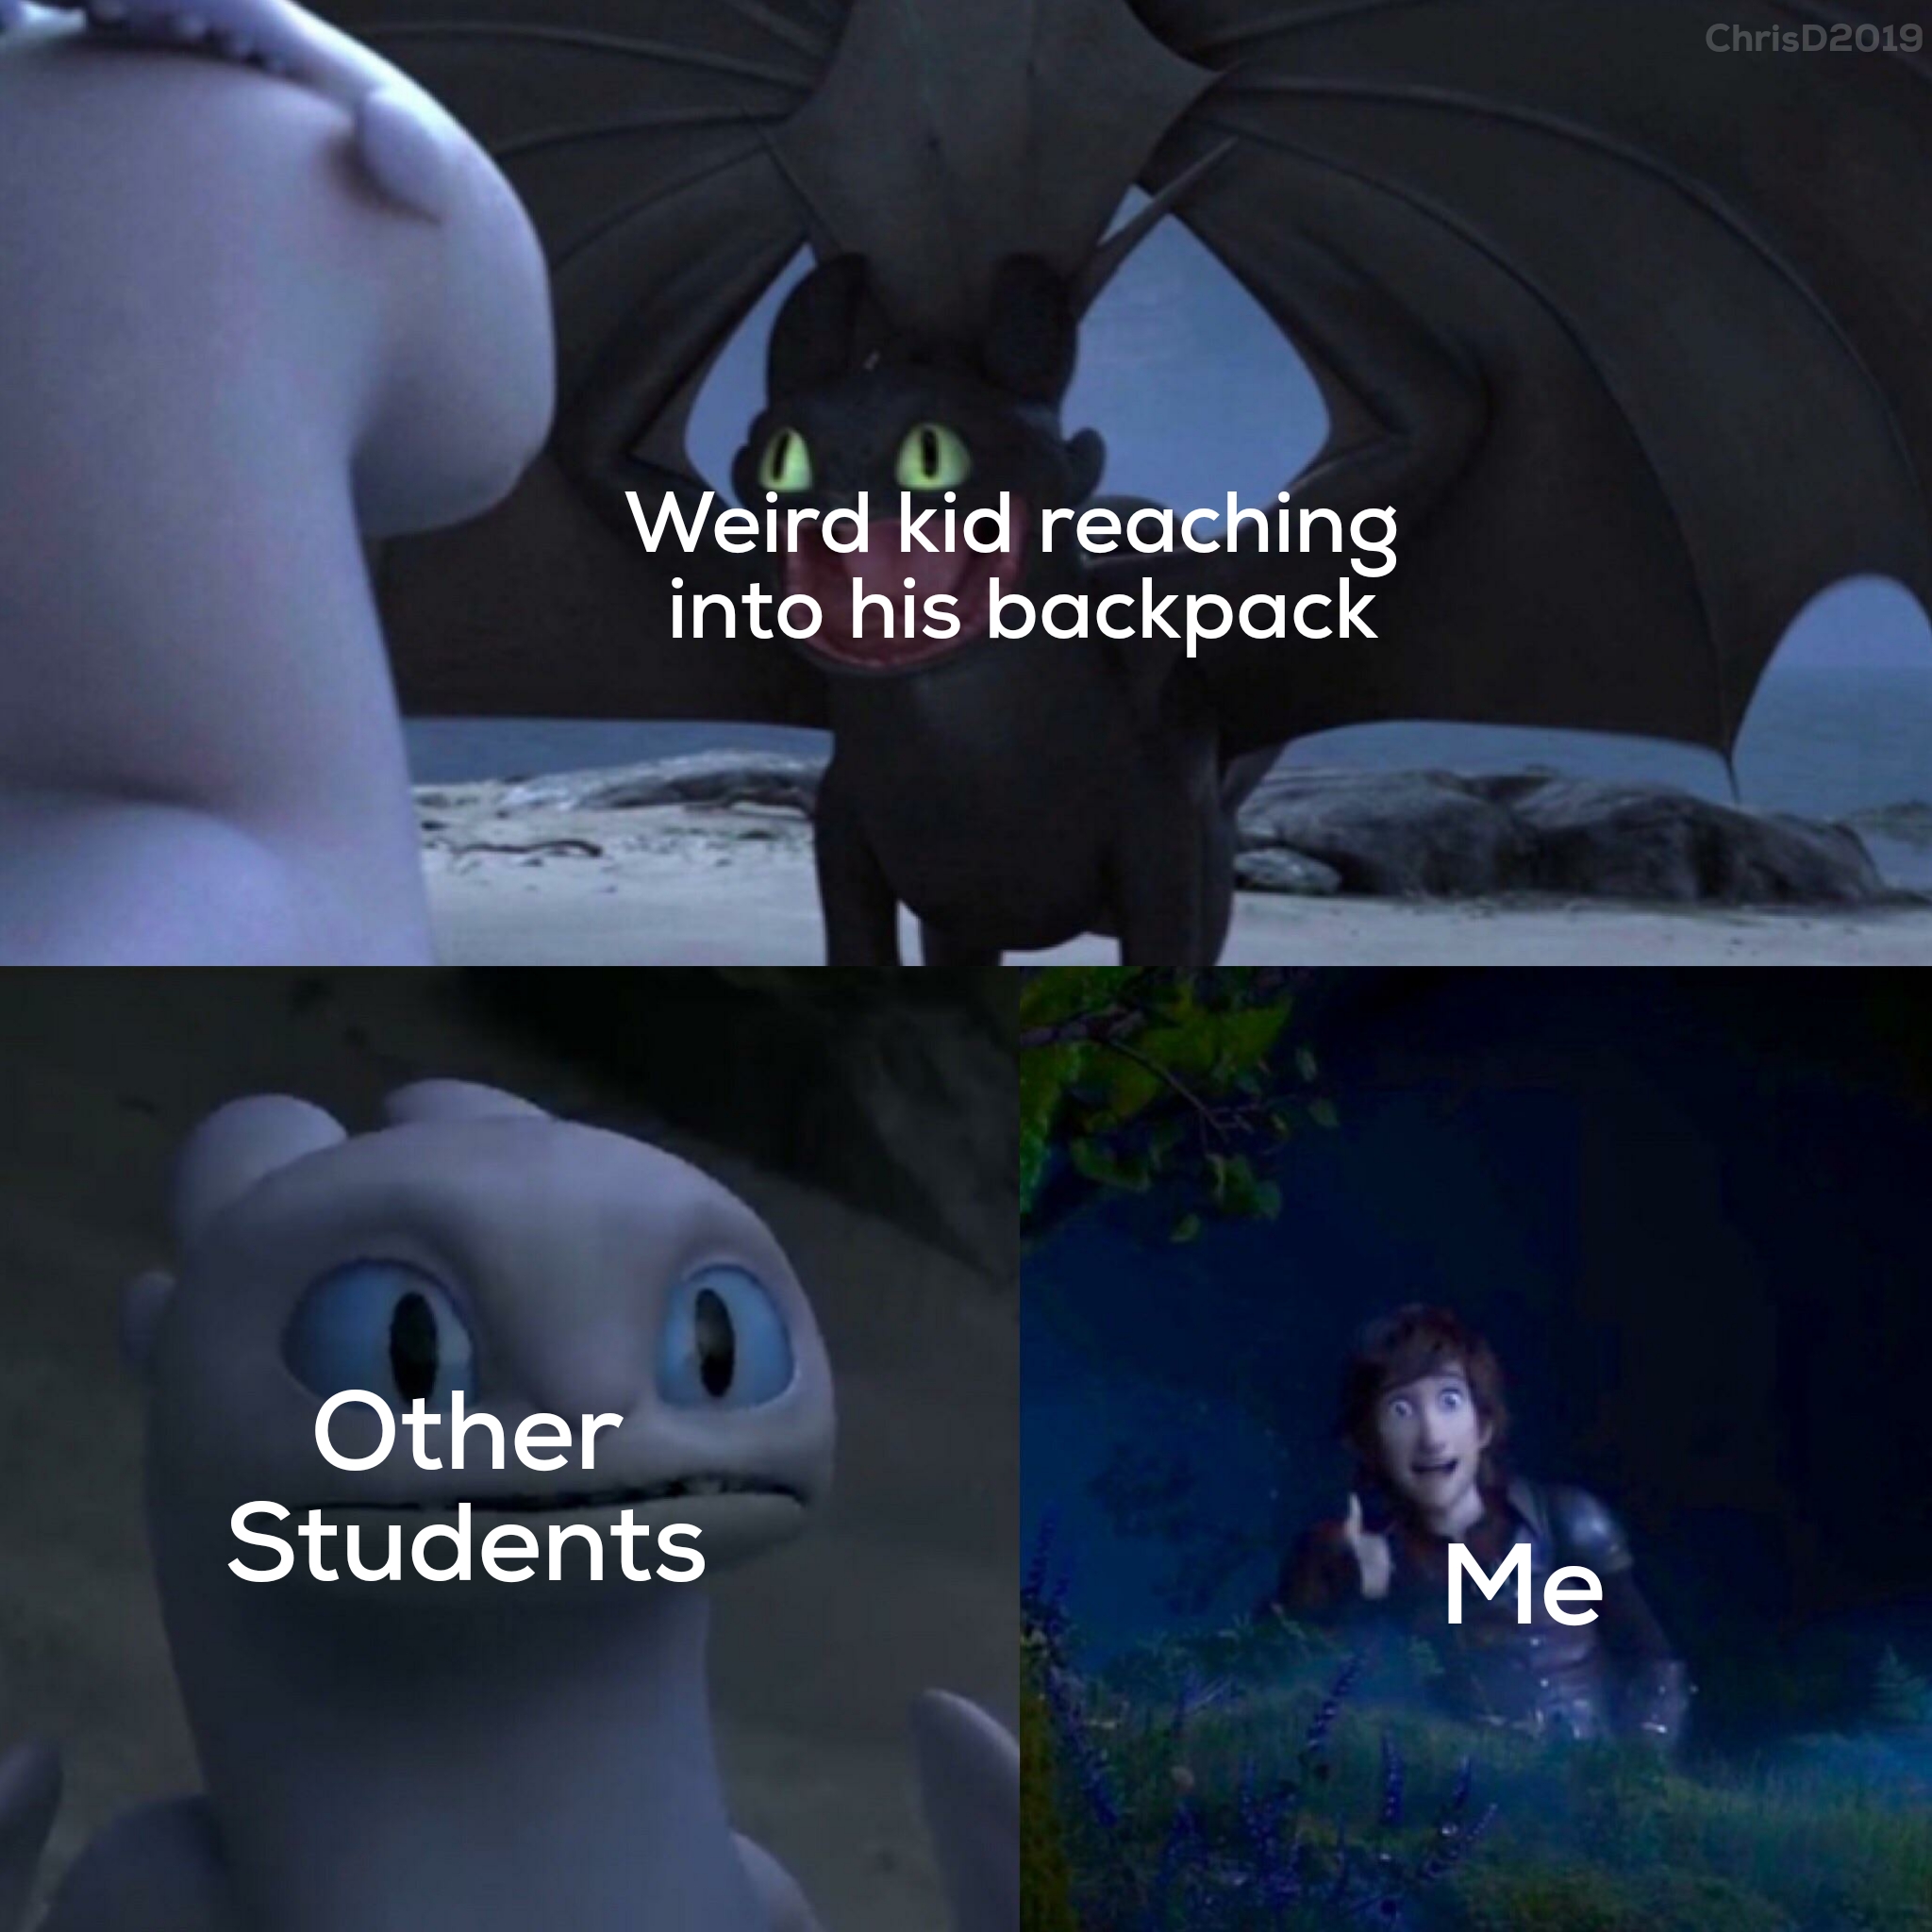 toothless how to train your dragon meme about video - Chris2010 Weird kid reaching into his backpack Other Students Me